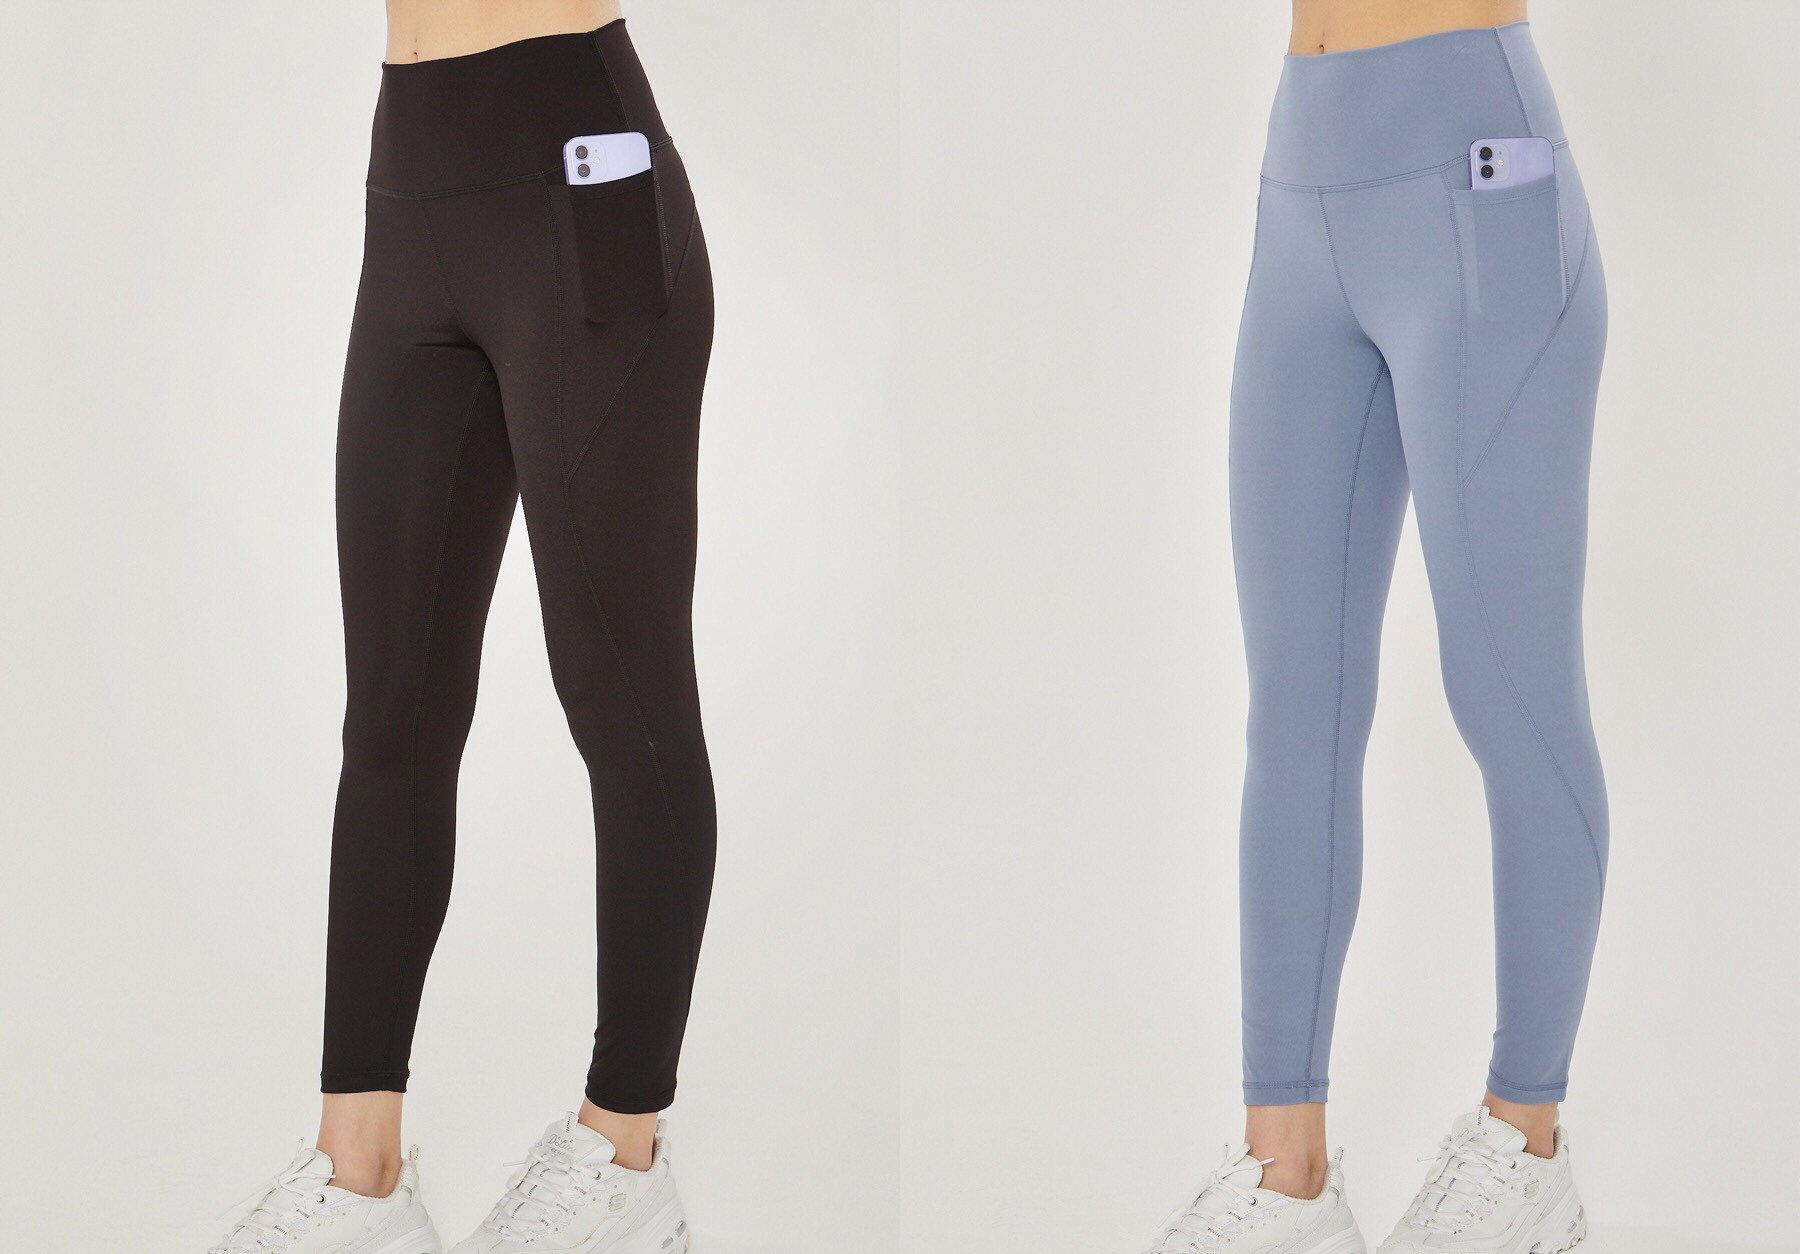 Buy Active Leggings With Phone Pockets. Wide Waistband Athletic Leggings.  Workout Sports Full Length Moisture Wicking Legging in Black and Blue  Online in India 